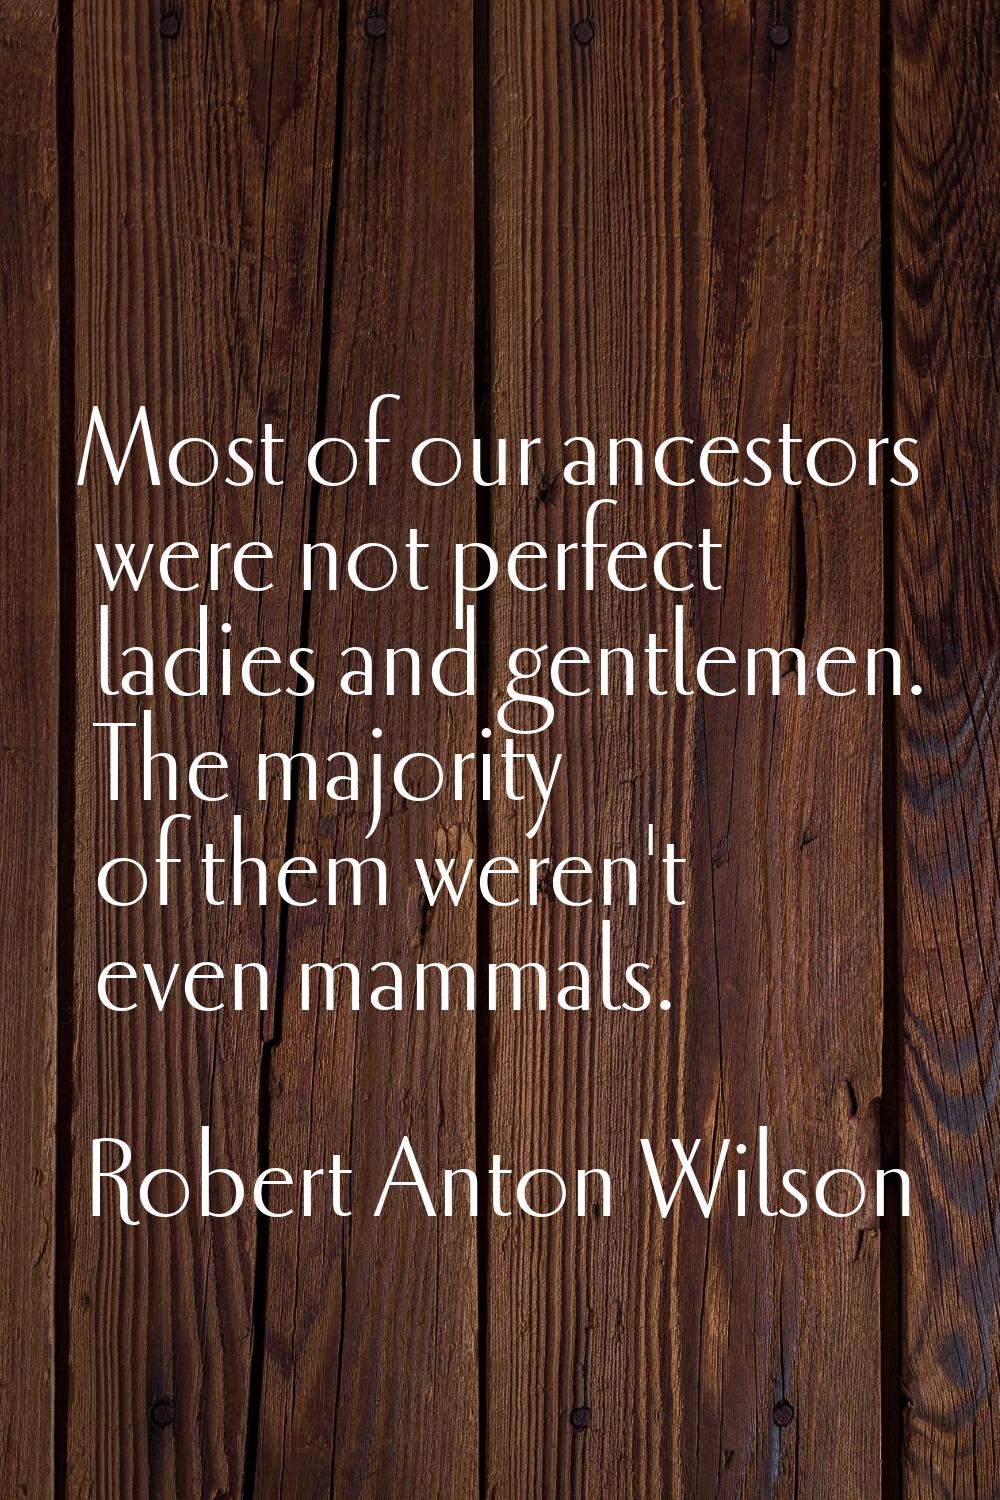 Most of our ancestors were not perfect ladies and gentlemen. The majority of them weren't even mamm